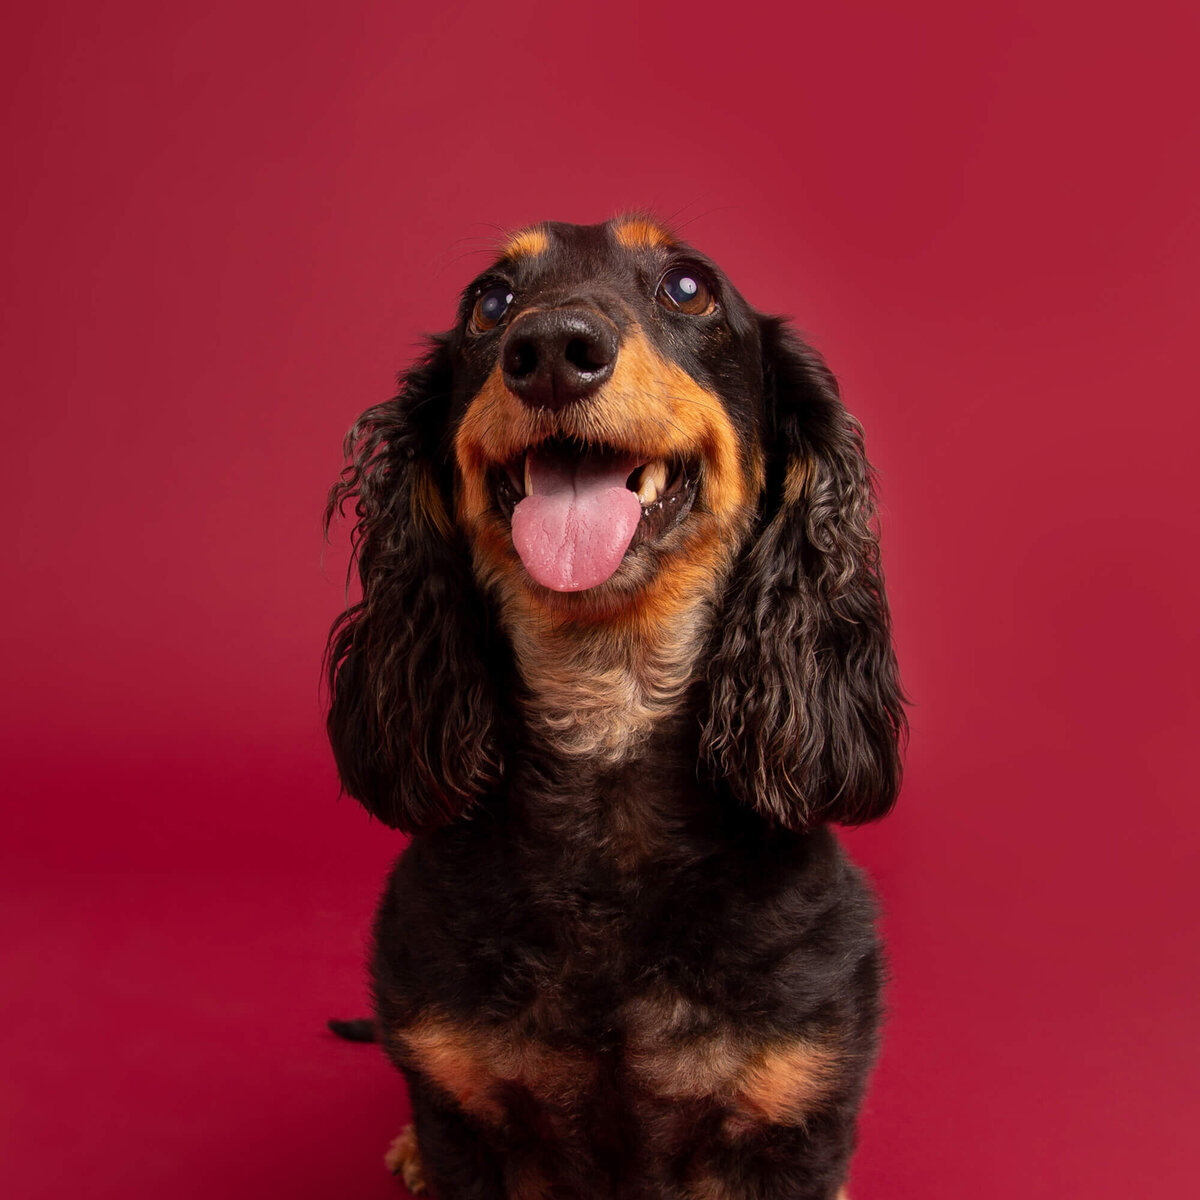 Dachshund on red backdrop